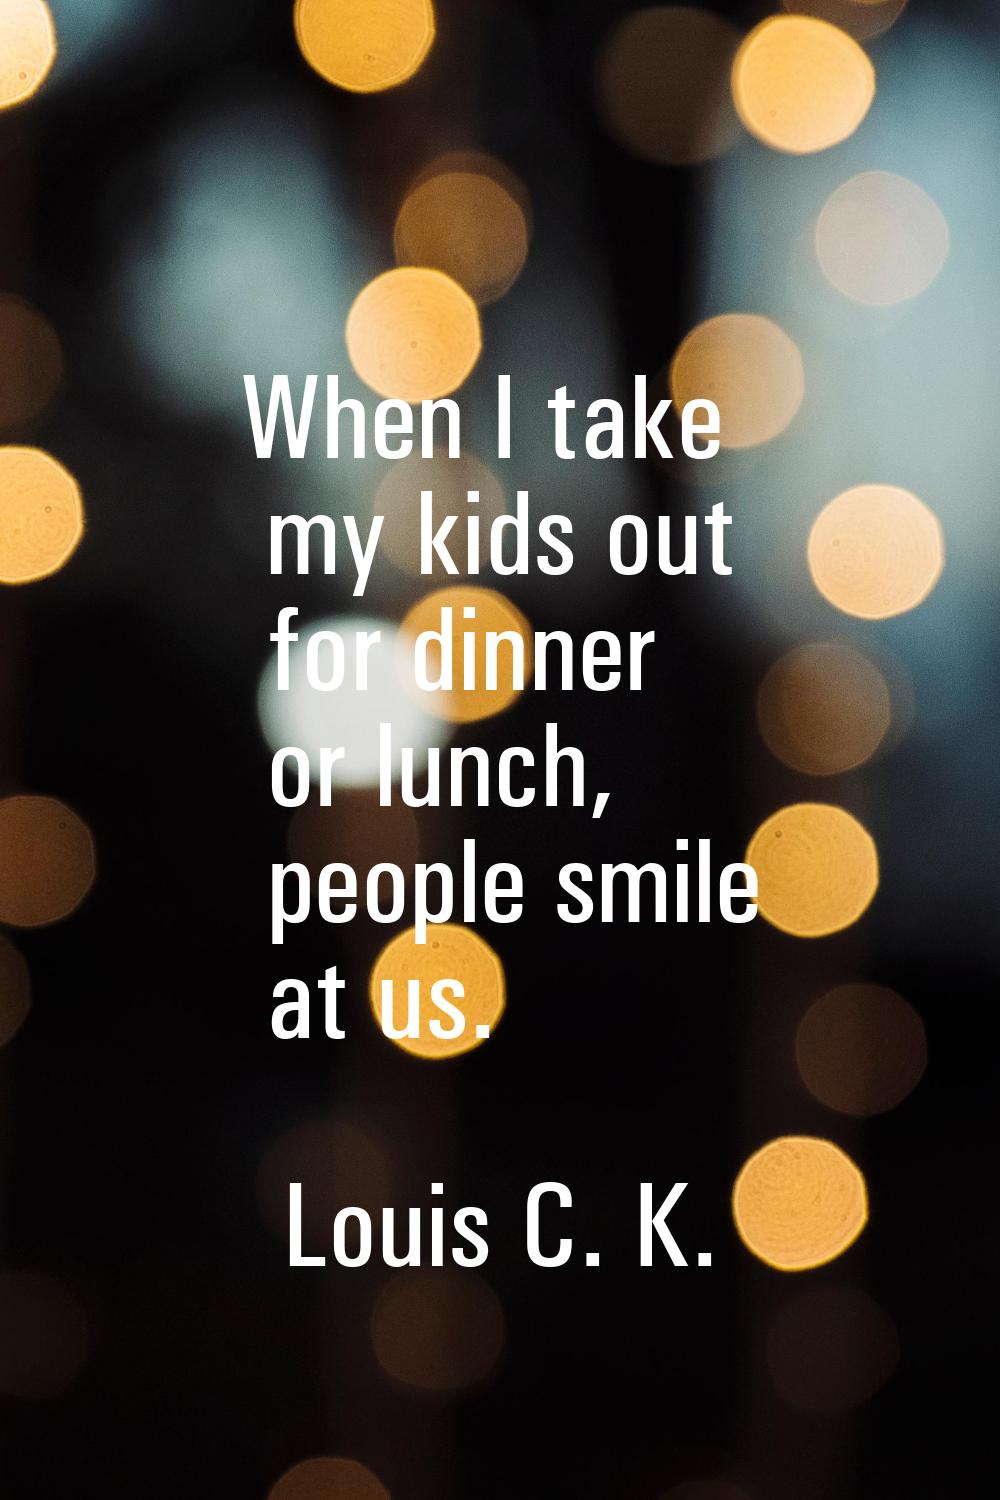 When I take my kids out for dinner or lunch, people smile at us.